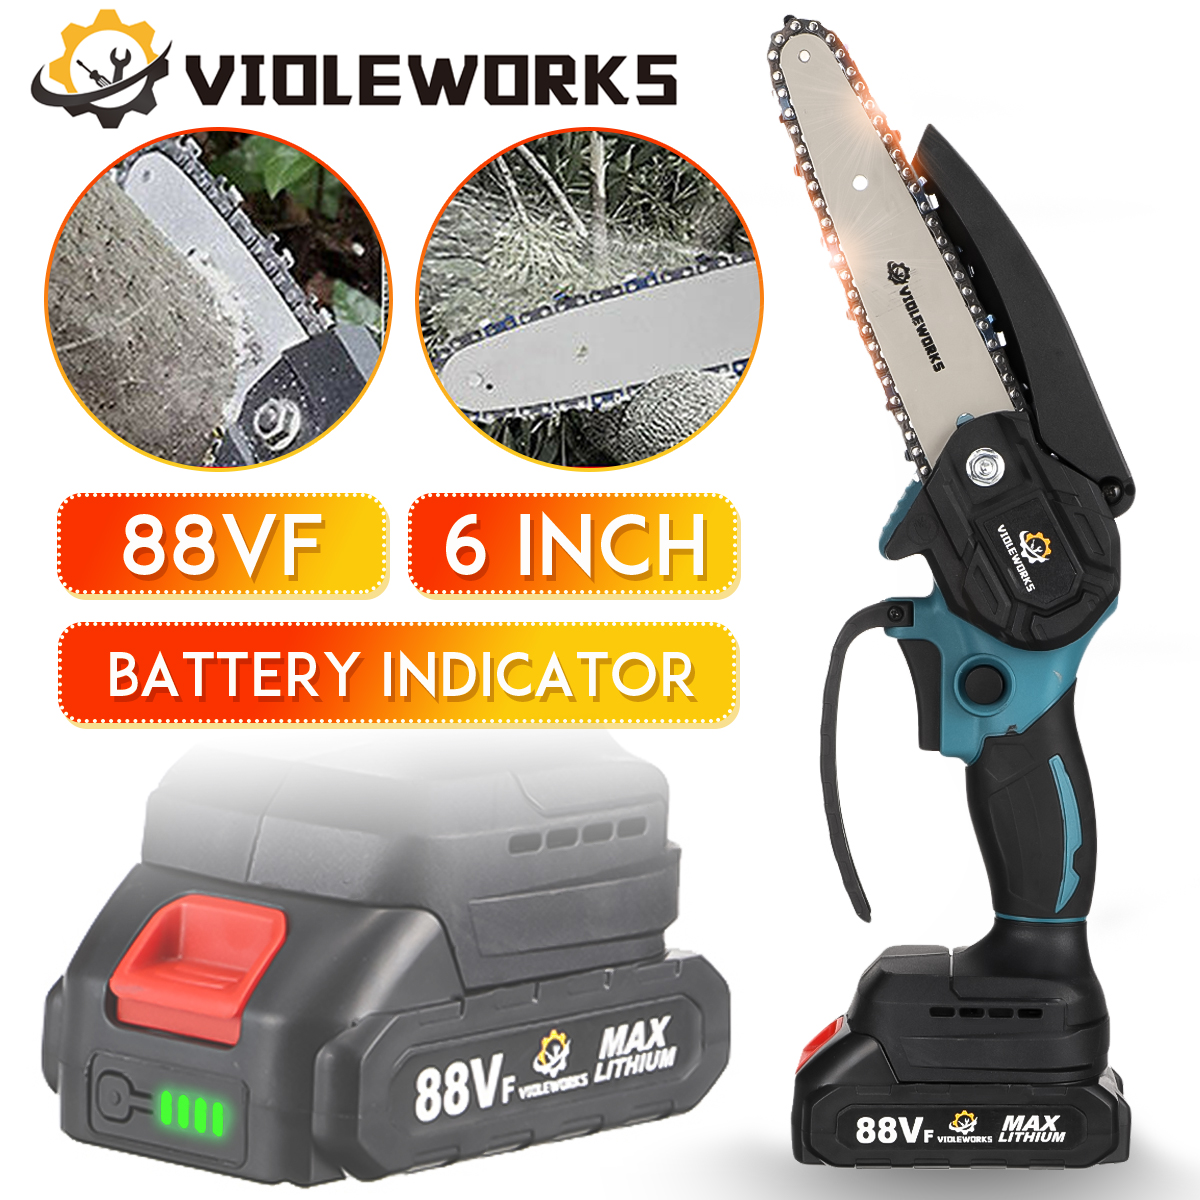 VIOLEWORKS-88VF-6-Inch-Electric-Chain-Saw-1500W-Cordless-One-Hand-Saws-Woodworking-Tool-Wood-Cutter--1862023-3